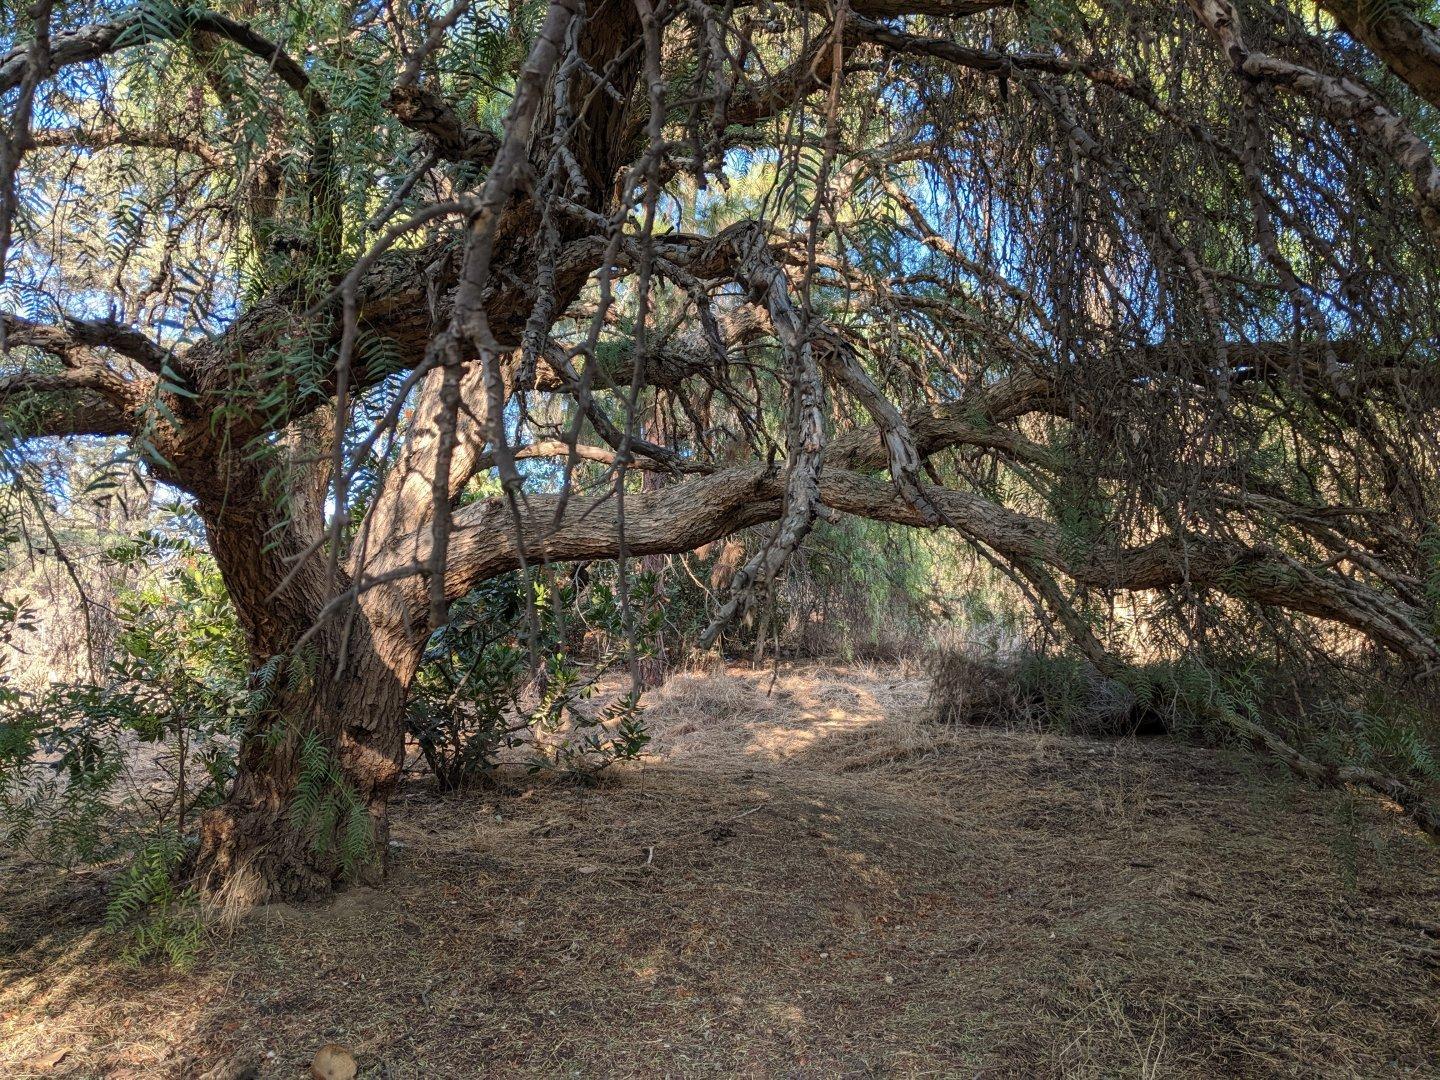 In the shade of the peppertree. #trees #shade #nature #hiking